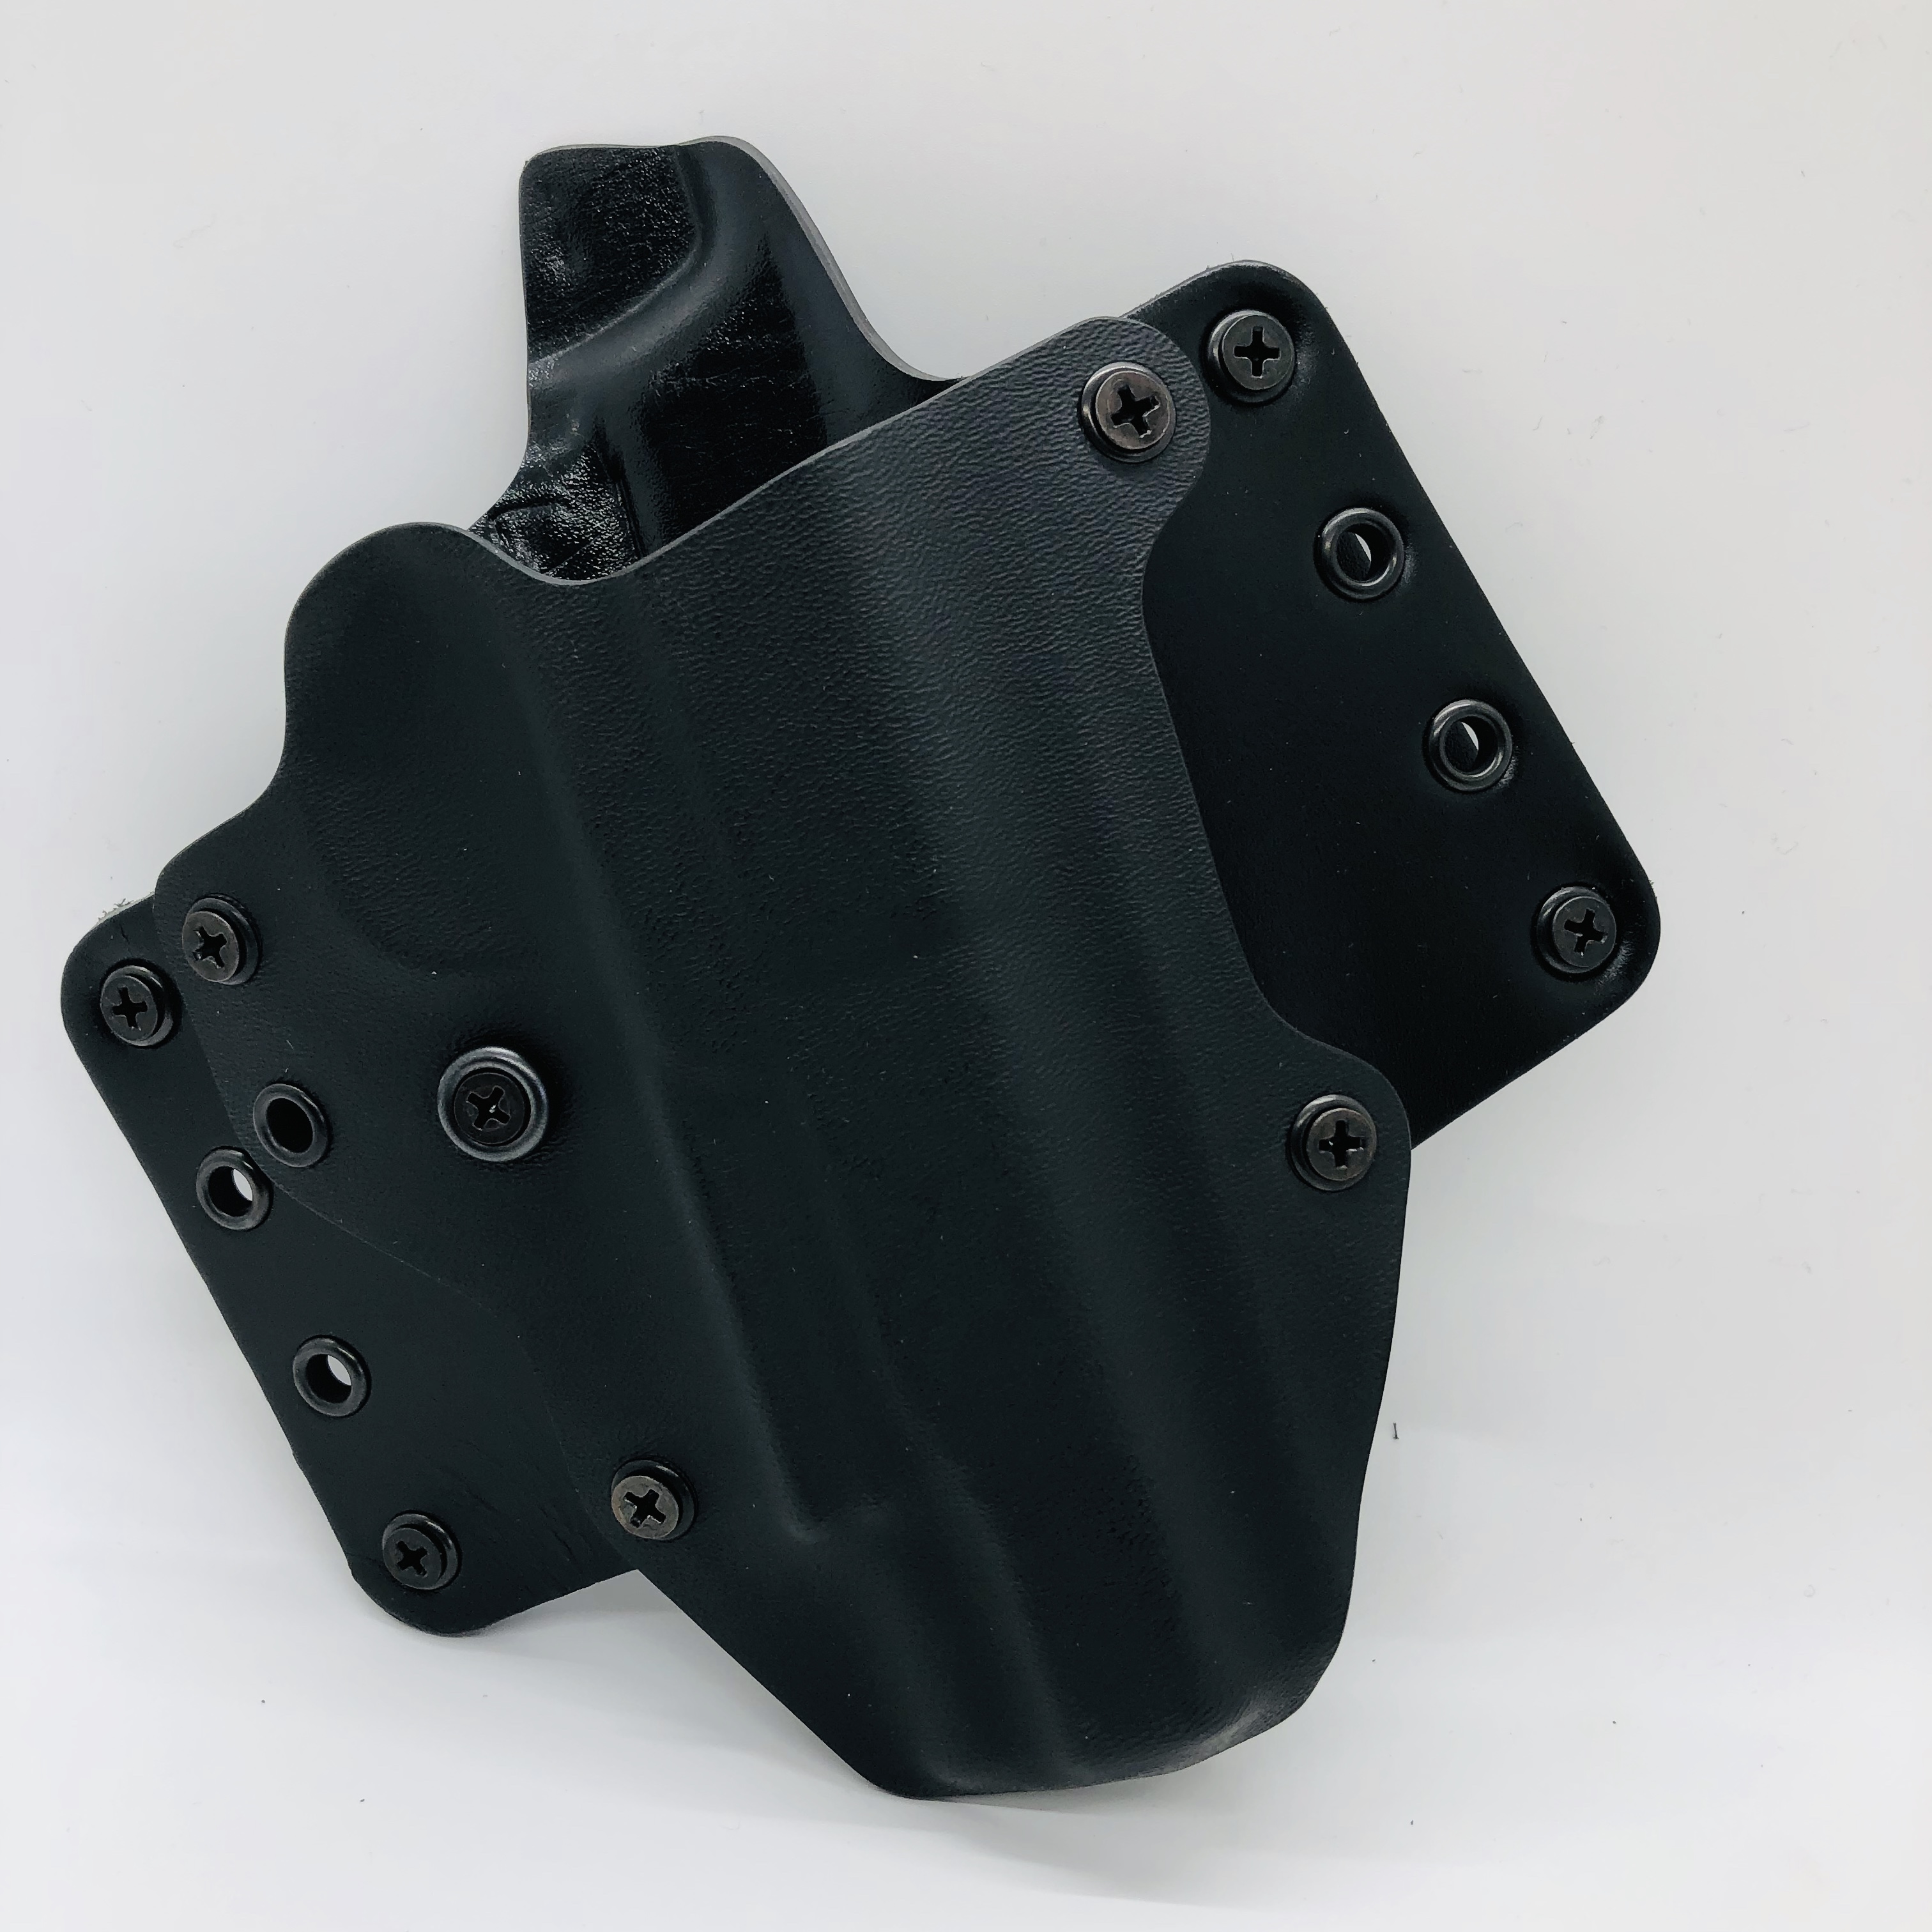 Blackpoint Tactical 100085 Leather Wing OWB 1.75" Holster For 1911 5" BLK Blackpoint Tactical 100085 Leather Wing OWB 1.75" Holster For 1911 5" BLK